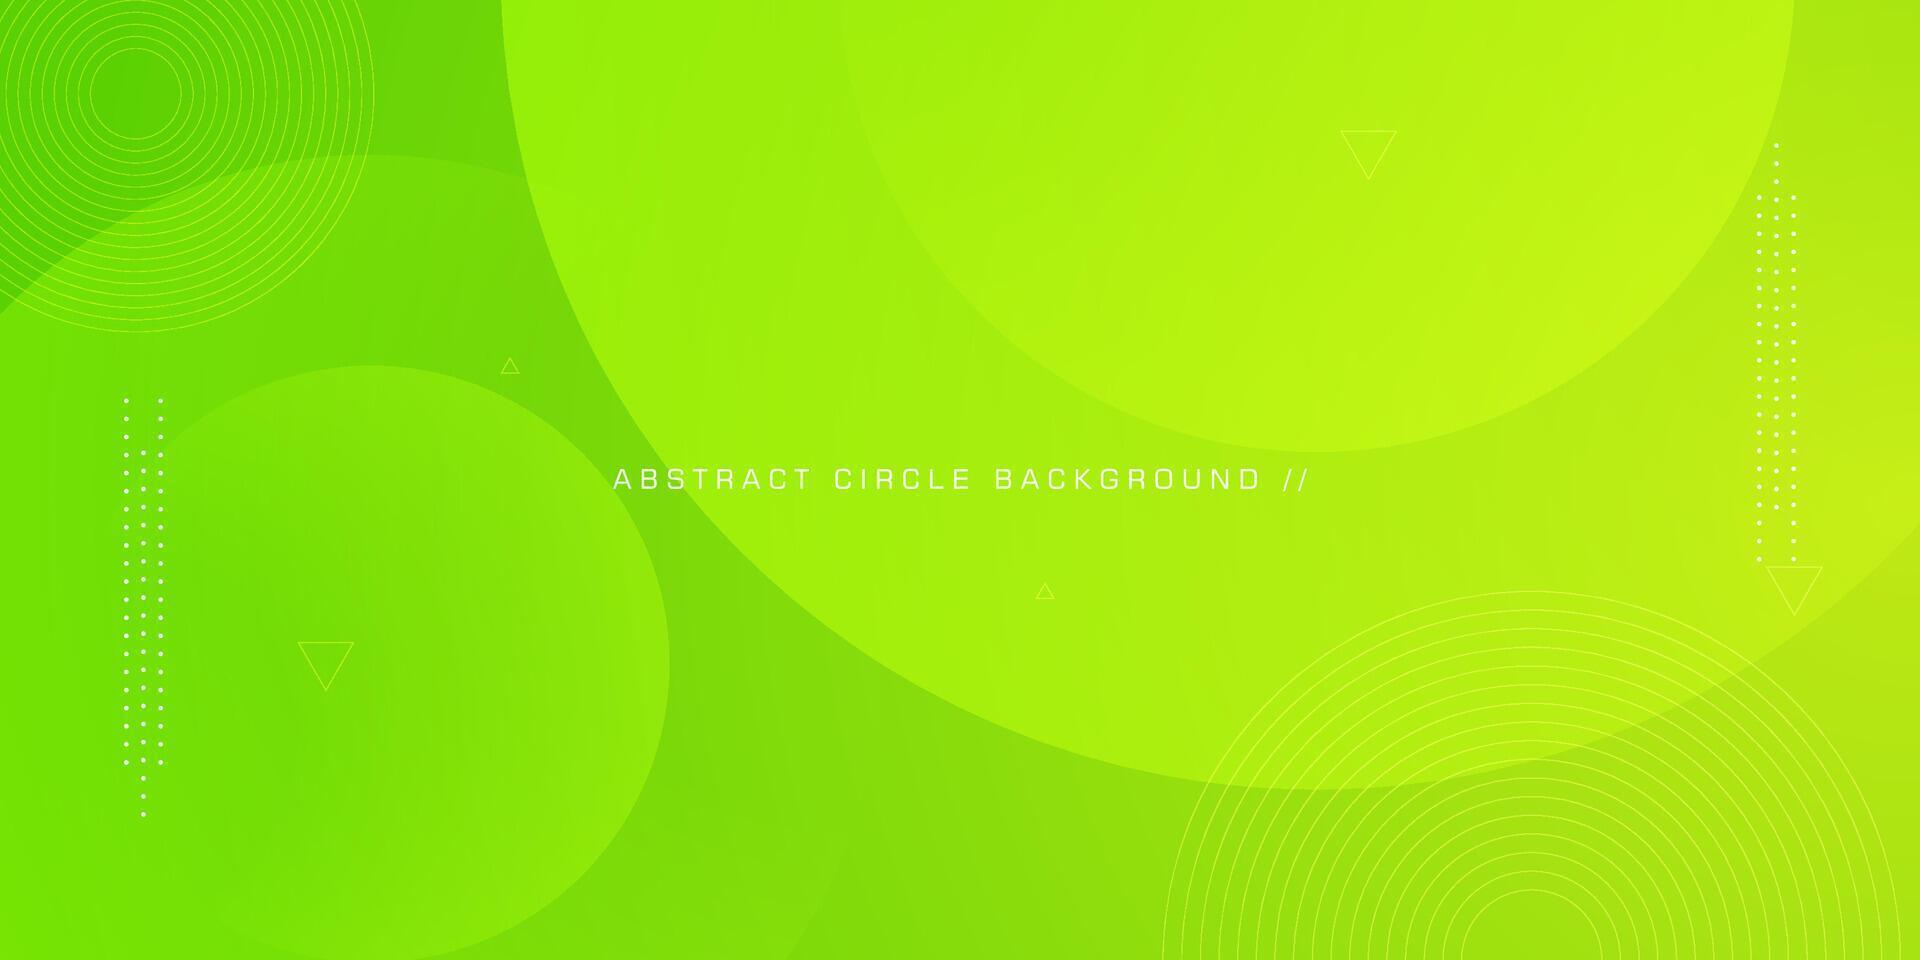 Abstract green background design. Circle gradient composition. Creative illustration for poster, web, landing, page, cover, ad, greeting, card, promotion. Eps 10 vector. vector